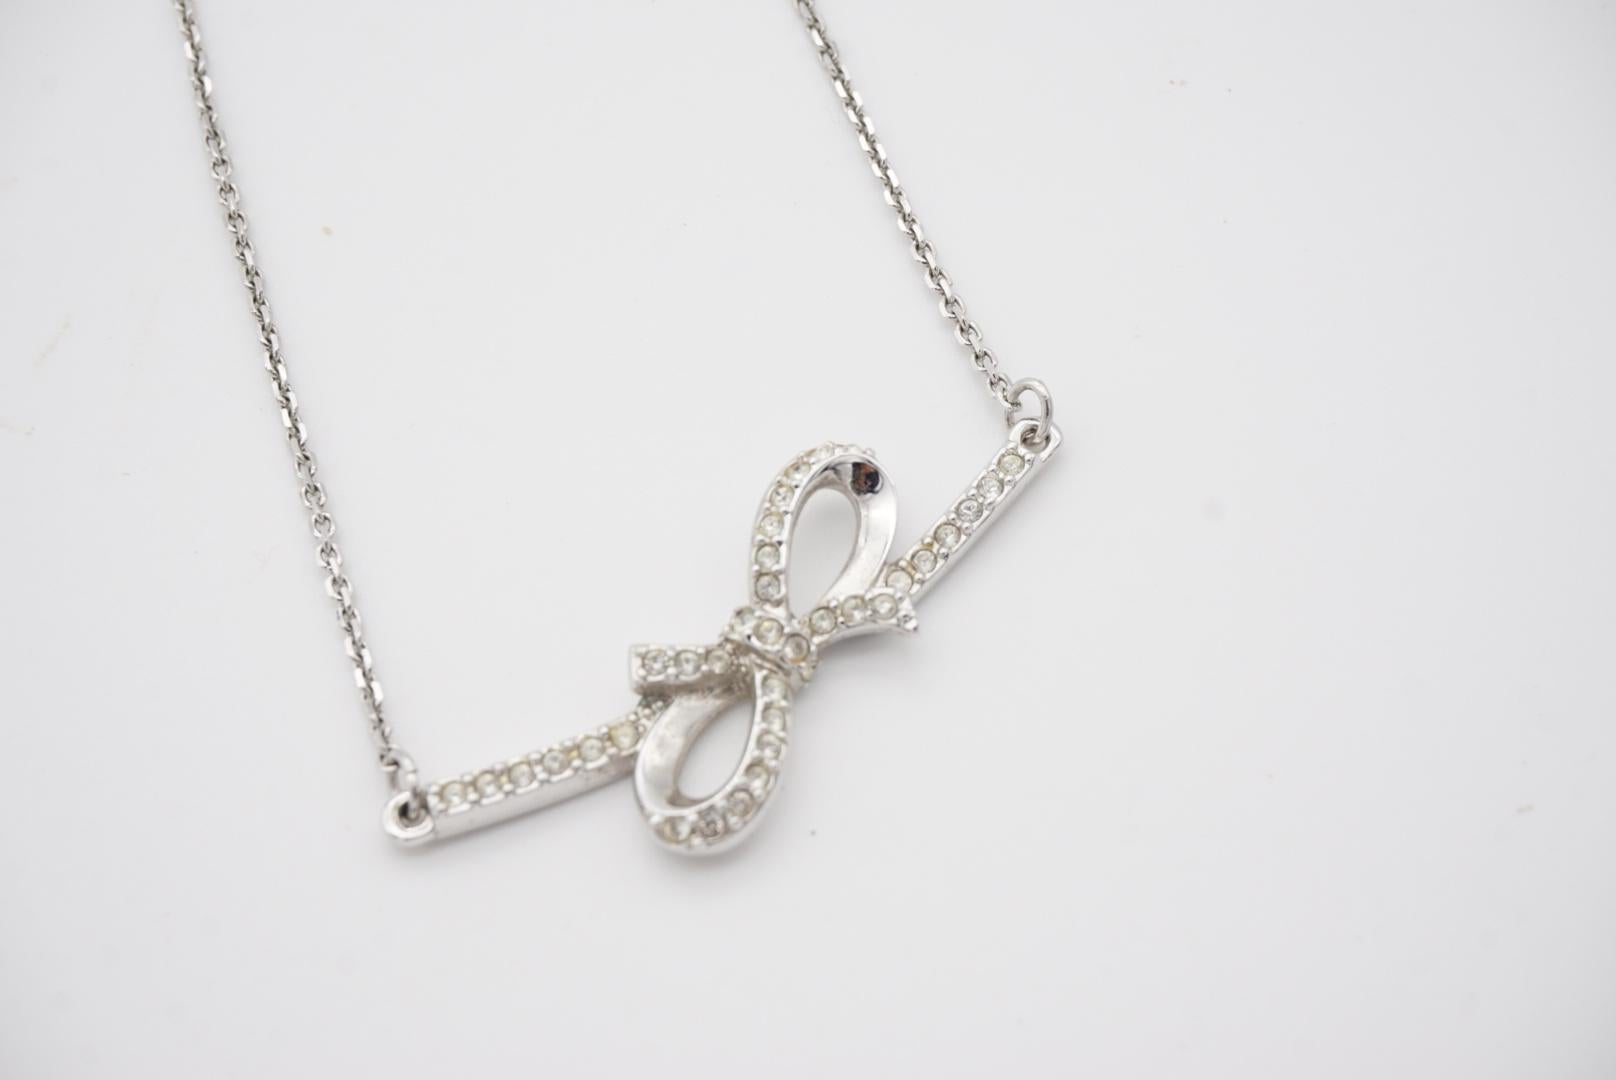 Swarovski Long Large Knot Bow Clear Crystals Pendant Necklace White Silver Tone For Sale 3